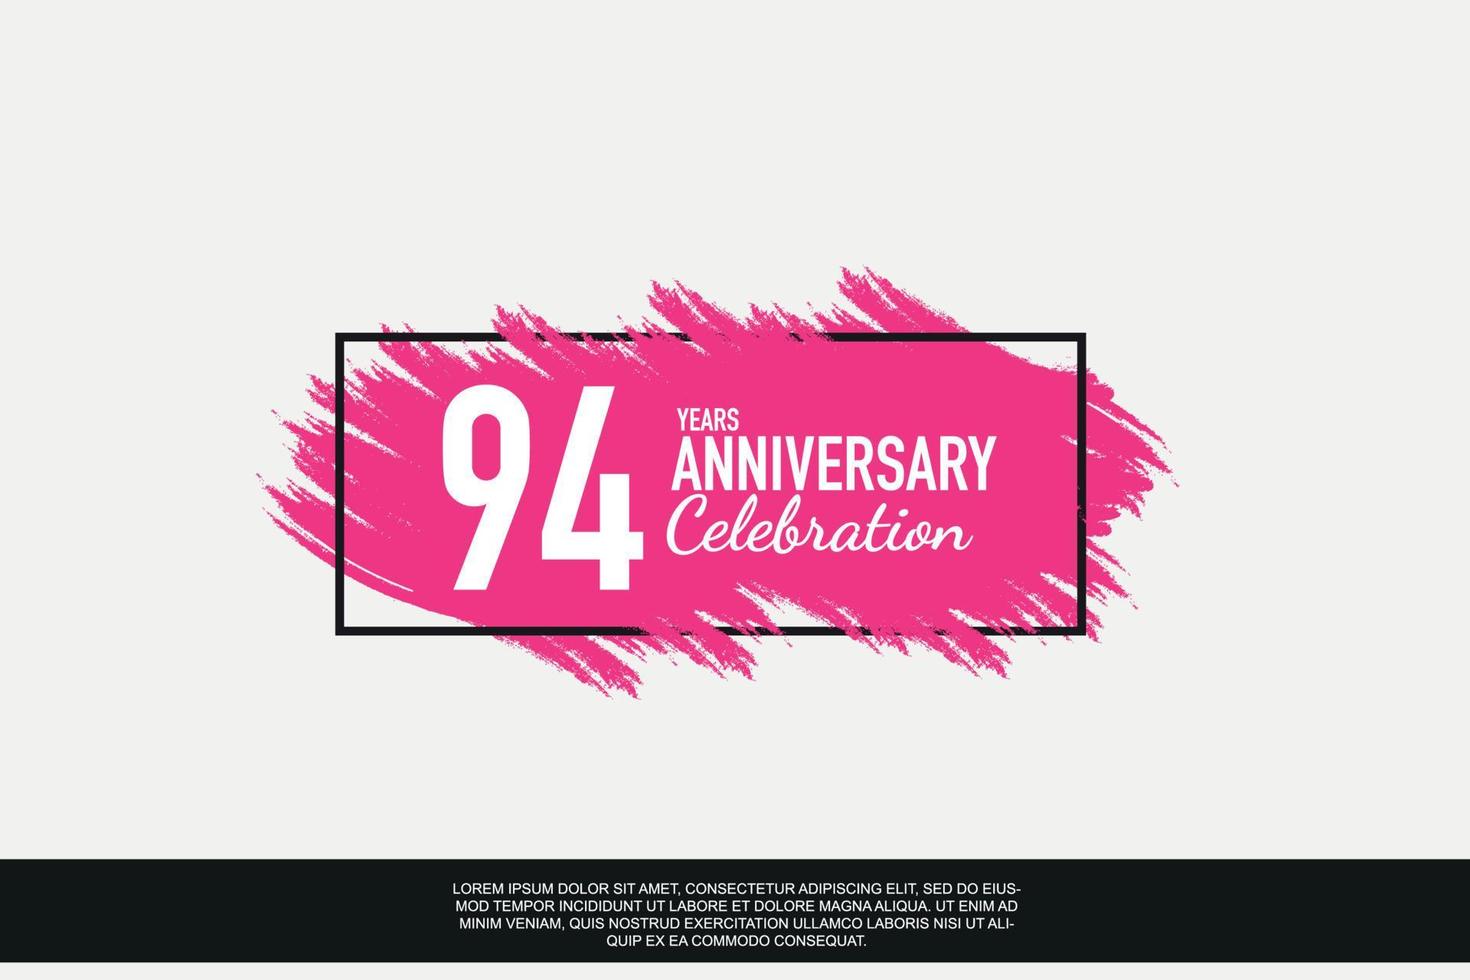 94 year anniversary celebration vector pink design in black frame on white background abstract illustration logo